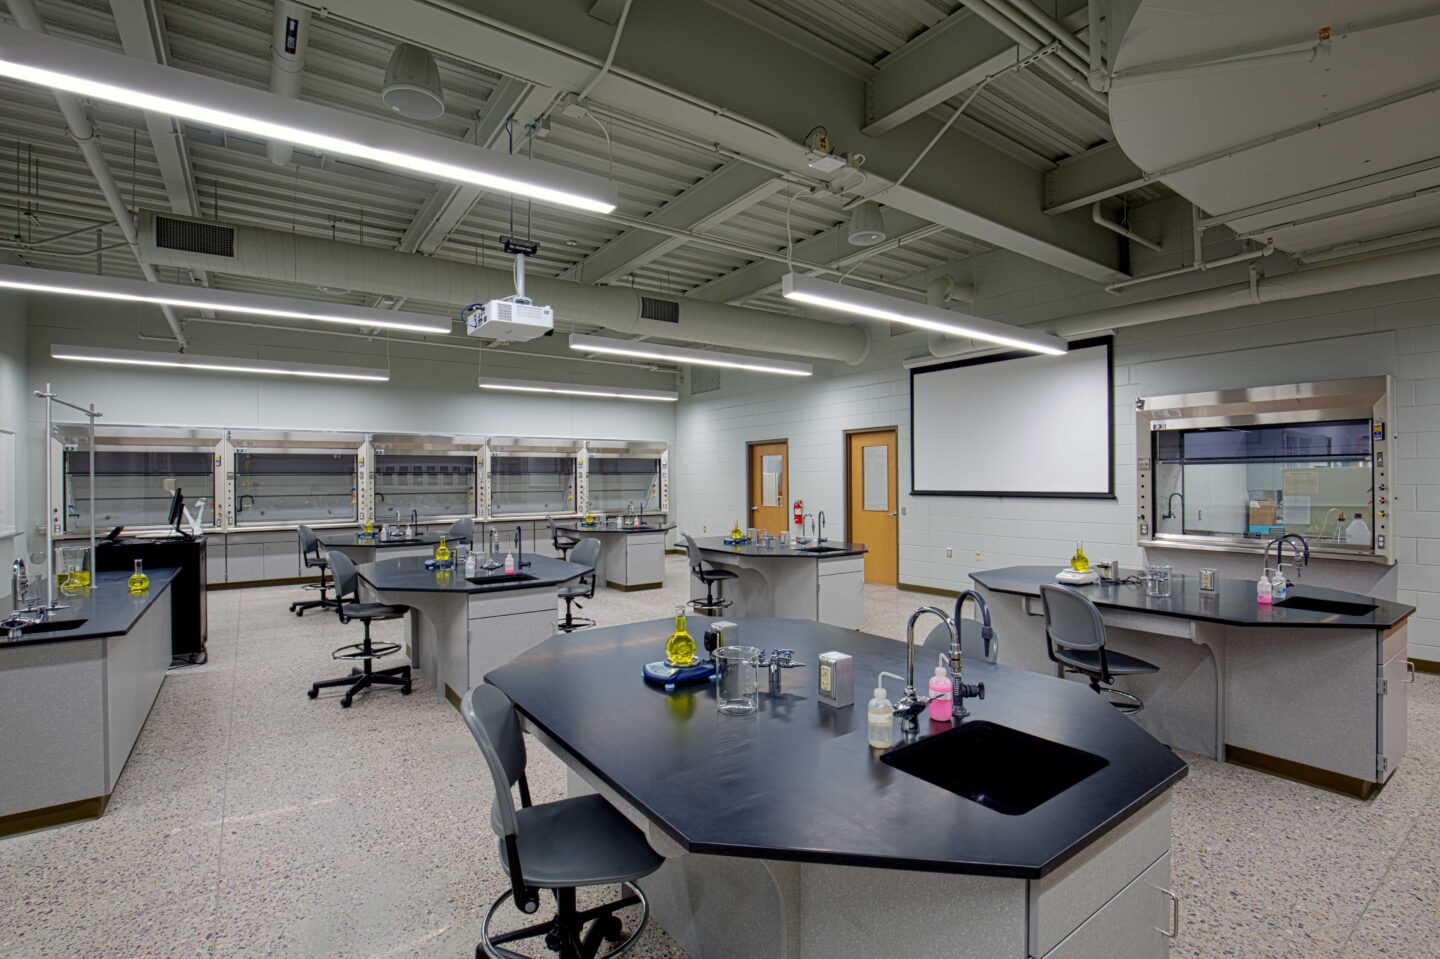 A new classroom features lab tables and equipment